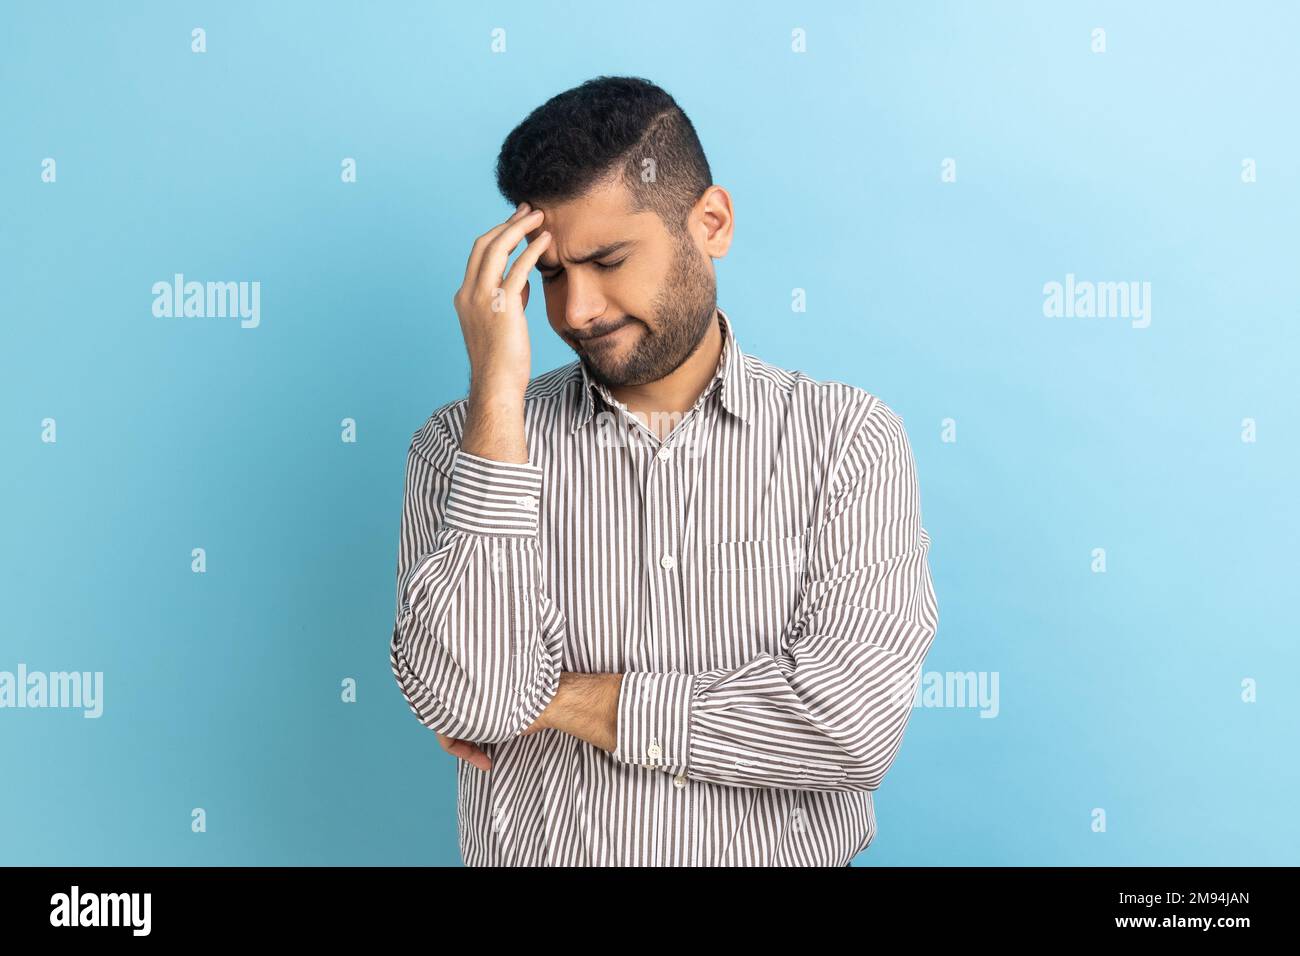 Businessman with beard making facepalm gesture keeping hand on head, blaming himself for bad memory, unforgivable mistake, wearing striped shirt. Indoor studio shot isolated on blue background. Stock Photo